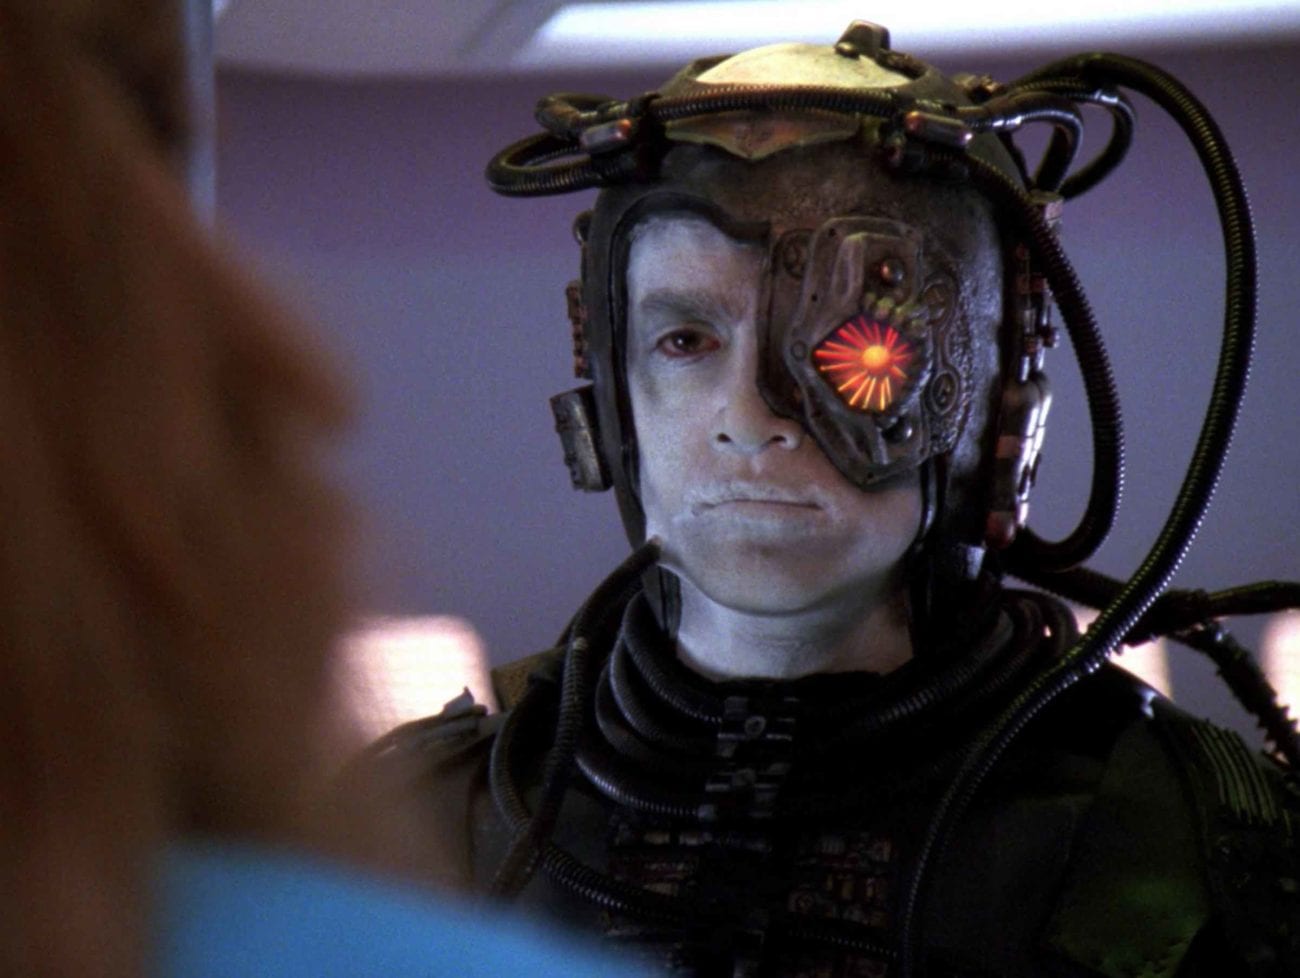 It has been confirmed that 'The Next Generations''s Hugh will reboot for 'Star Trek: Picard'. Here's what we know about the mysterious Borg and his return.